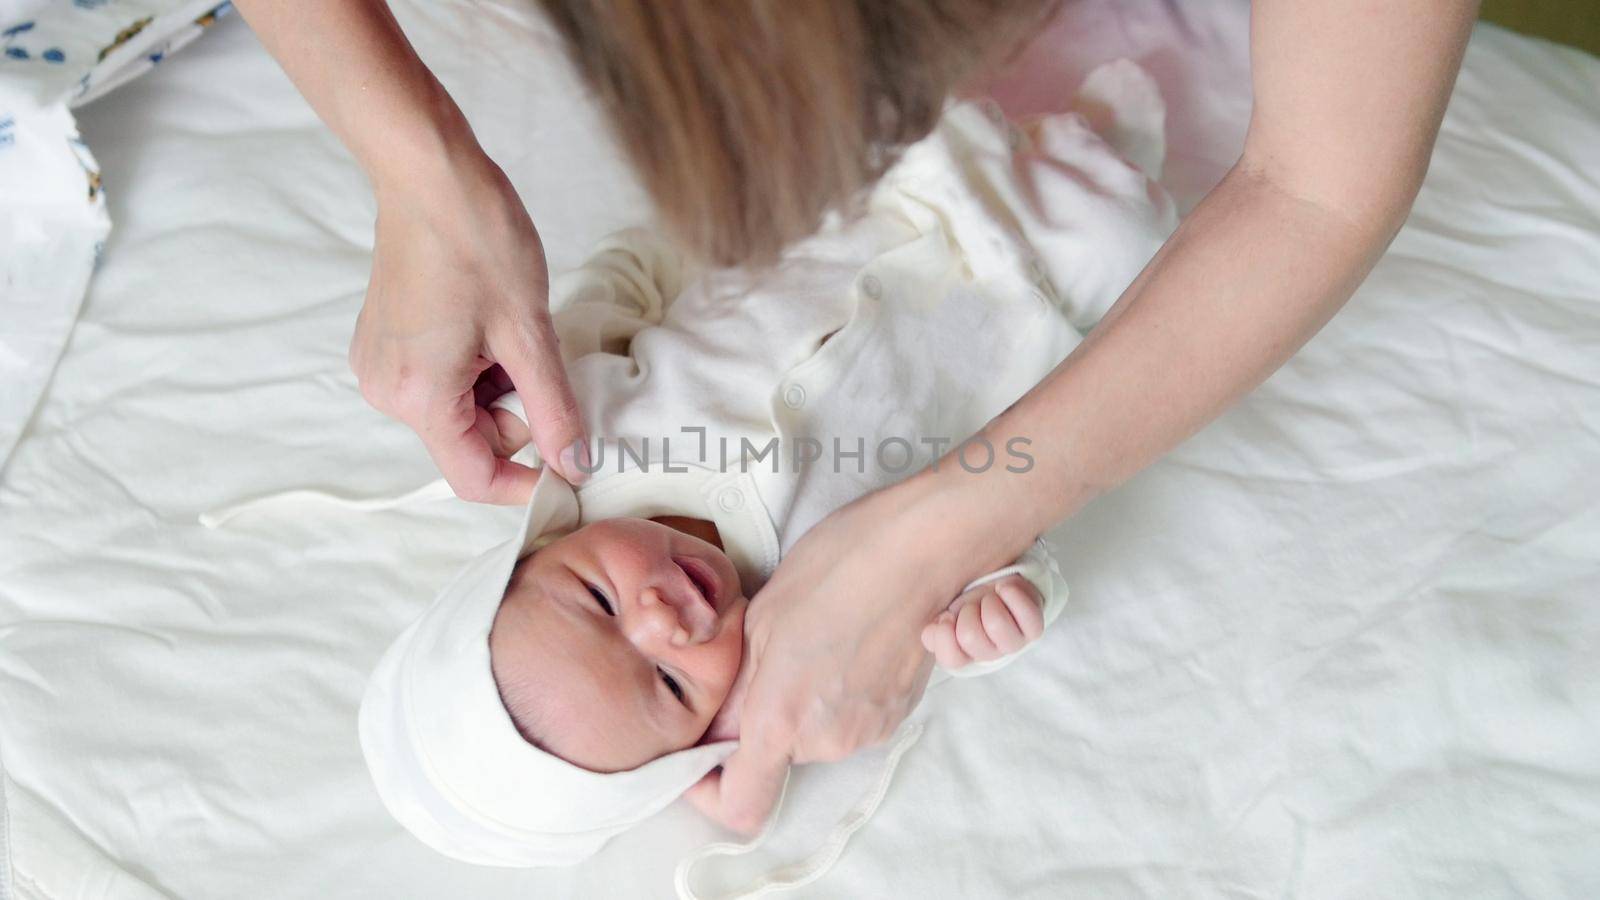 Mother is swaddling her child - newborn baby infant, close up